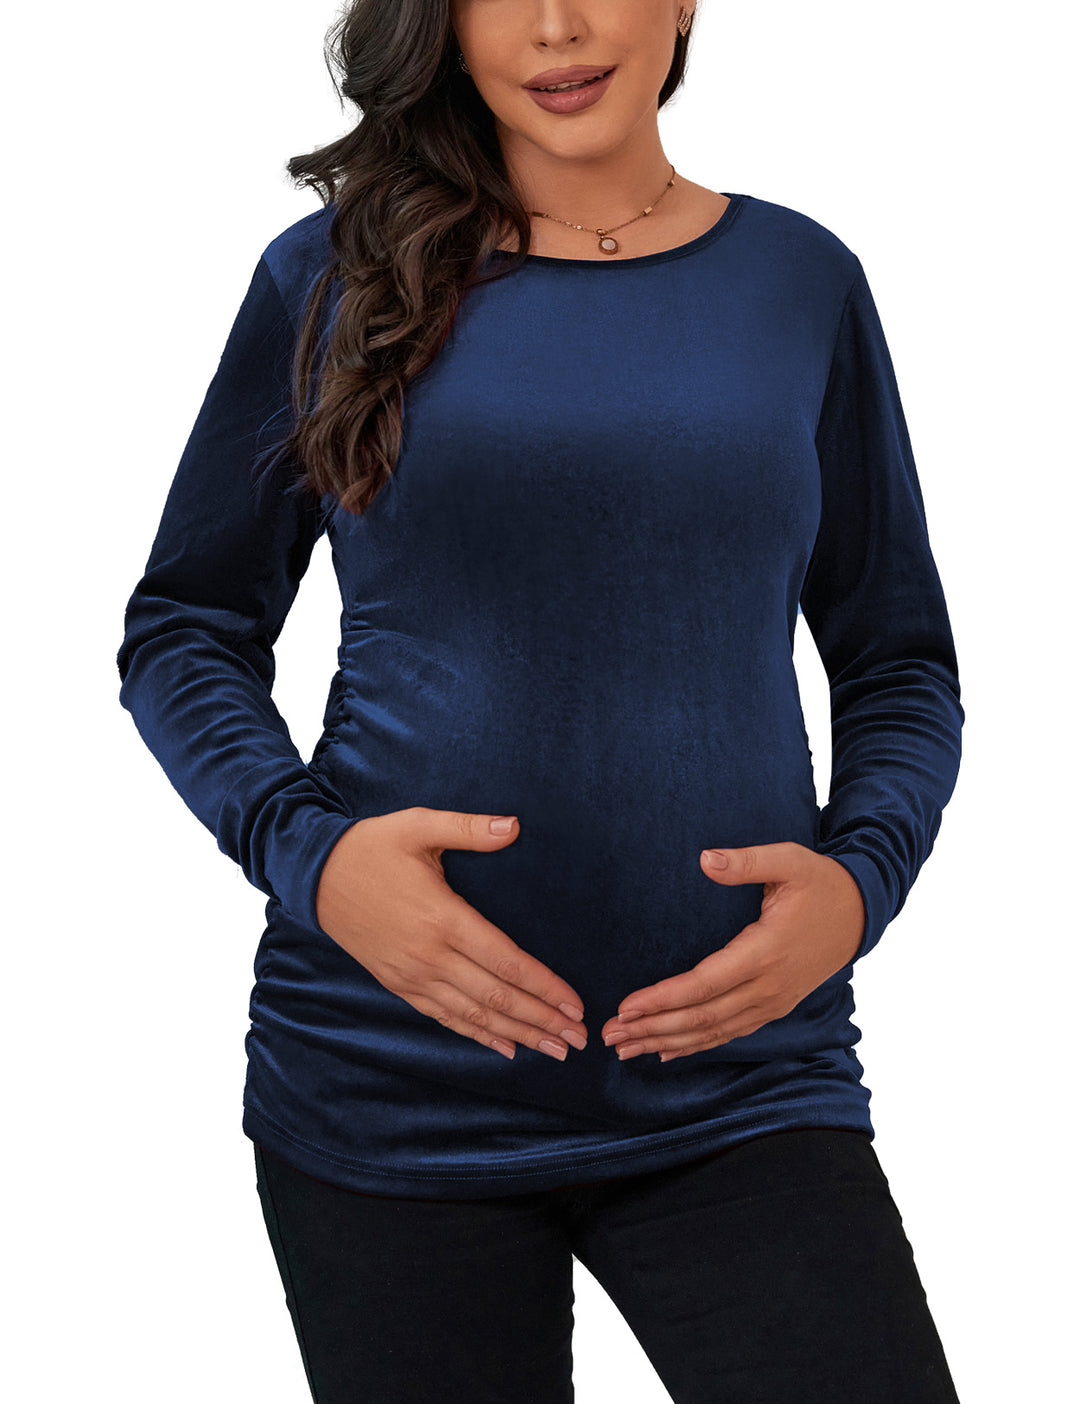 Bhome Vintage Long Sleeve Velvet Maternity Top with Ruched Sides